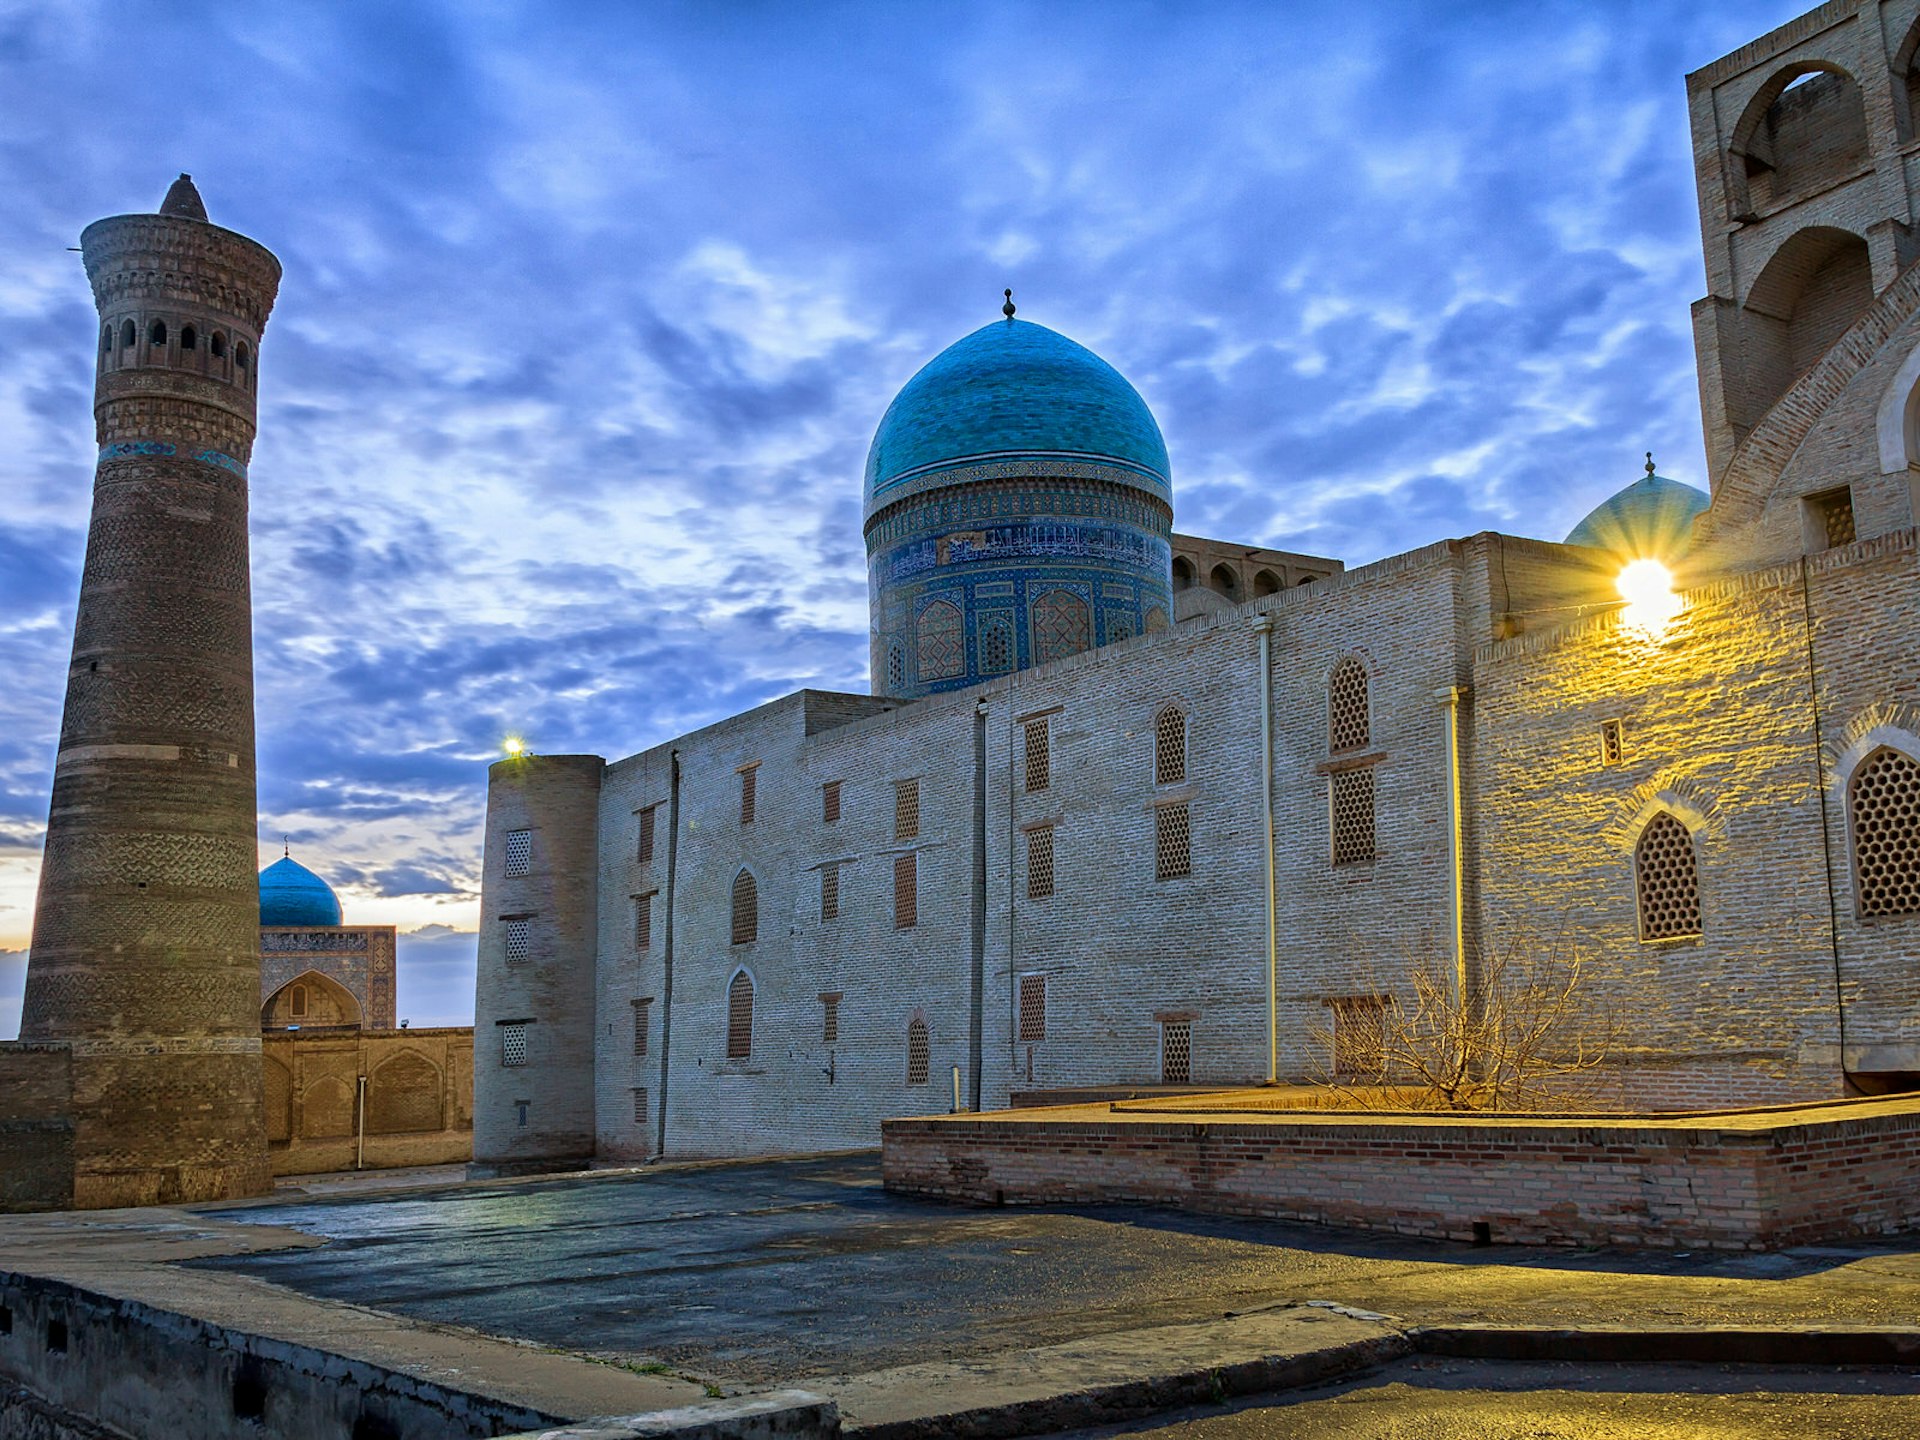 The blue dome and brown mud structures of the Kalon Mosque and minaret under cloudy, dusk skies.